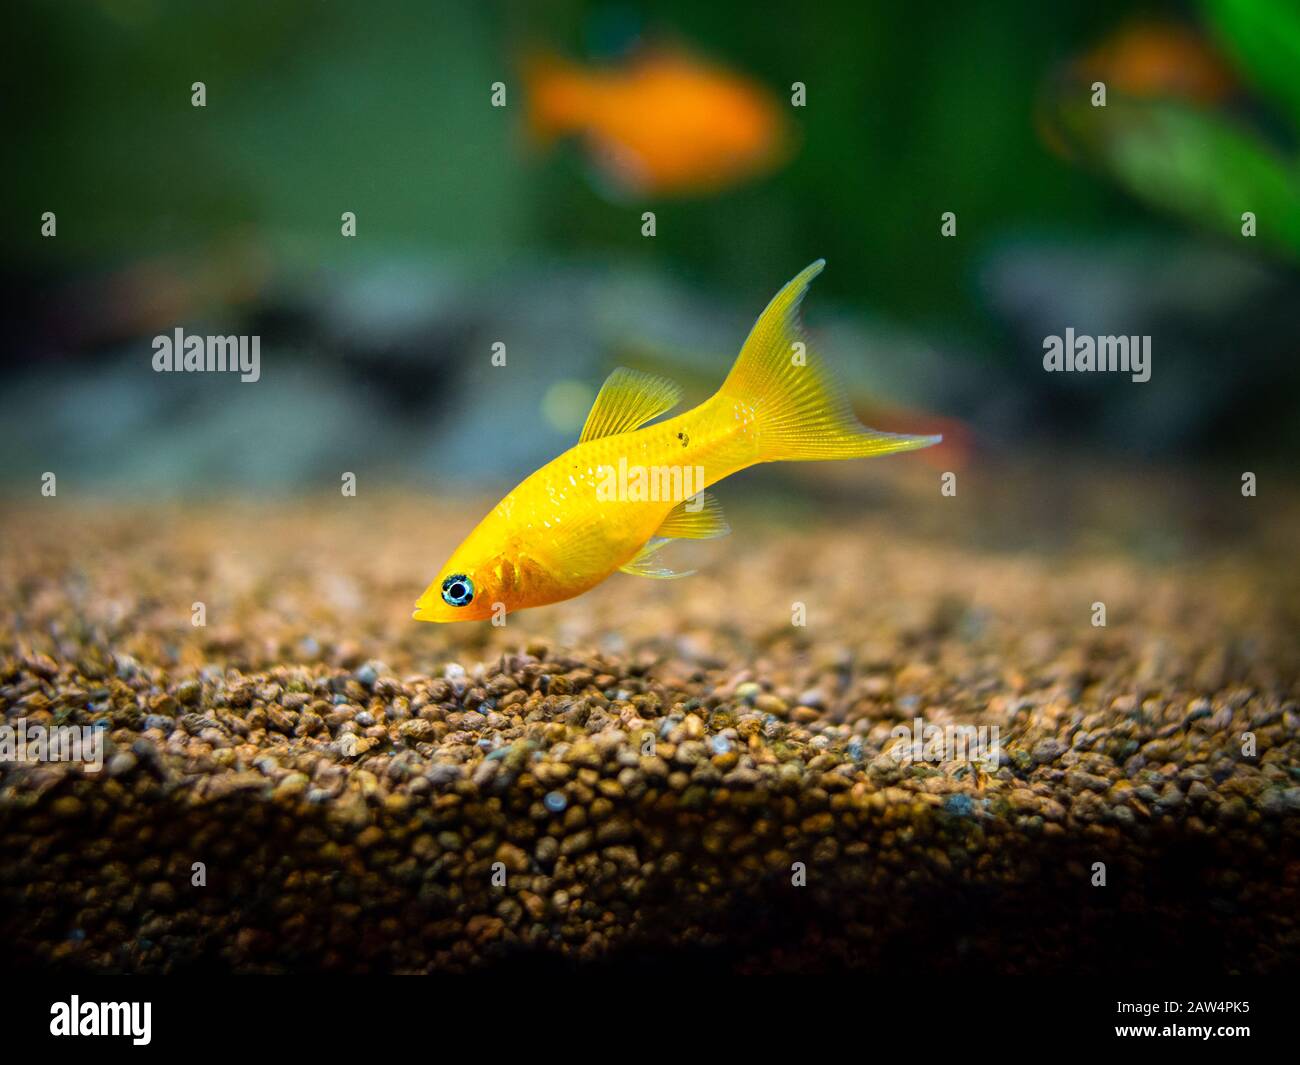 yellow molly fish (Poecilia sphenops) swimming on a fish tank Stock Photo